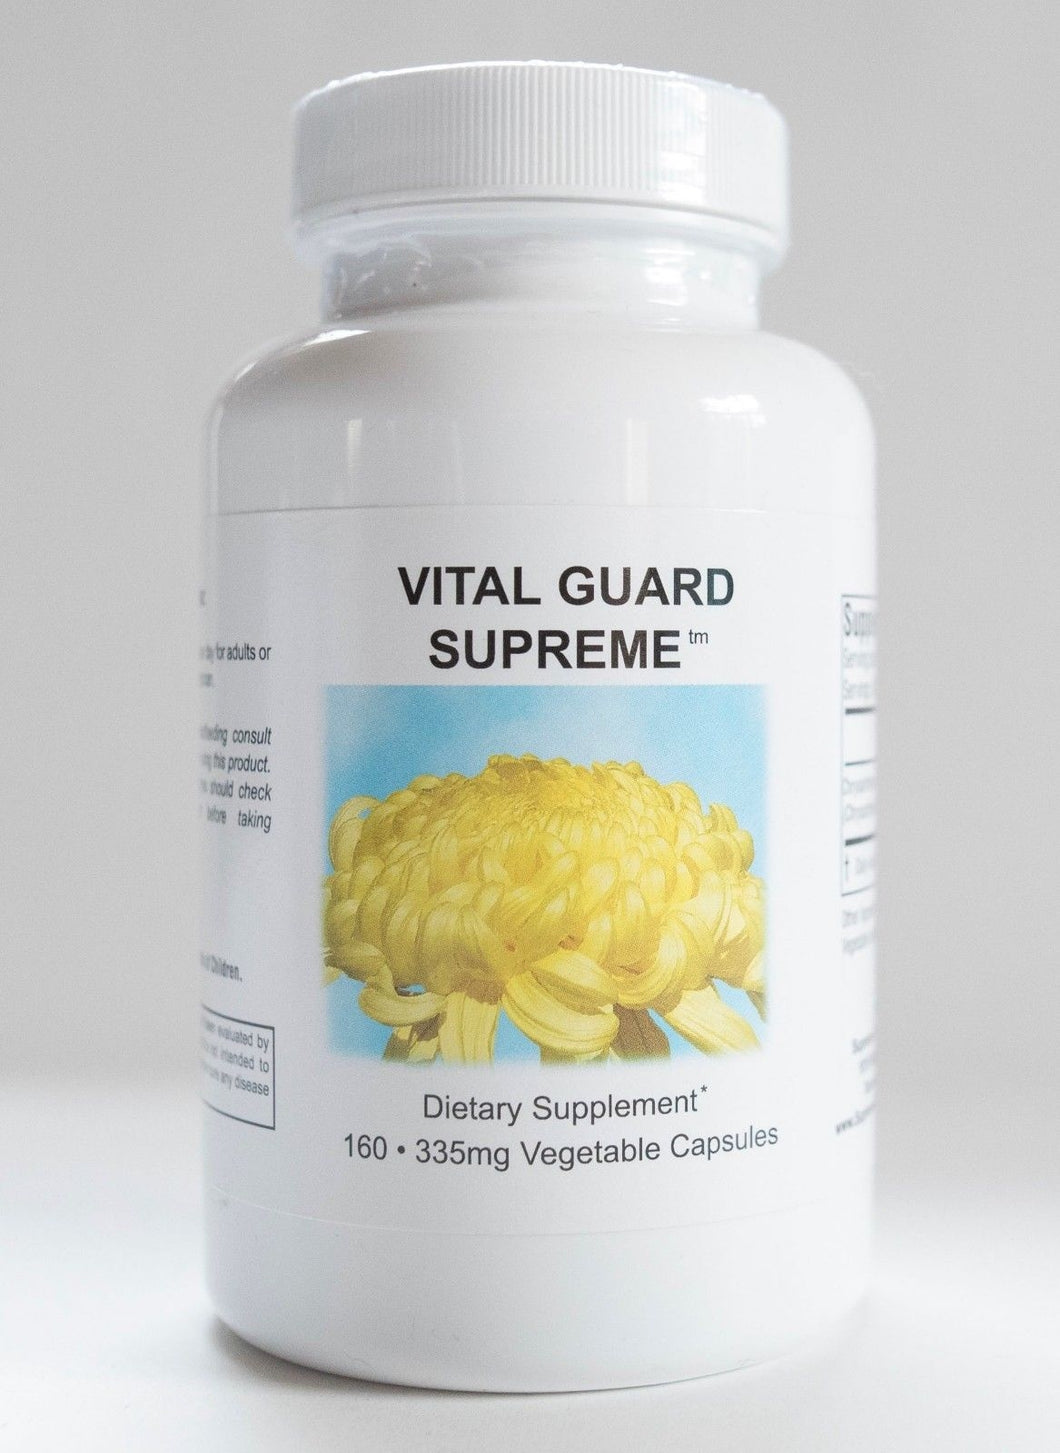 Vital Guard Supreme (Supreme Nutrition) Helps Infections, Lyme, Brain, Heart.